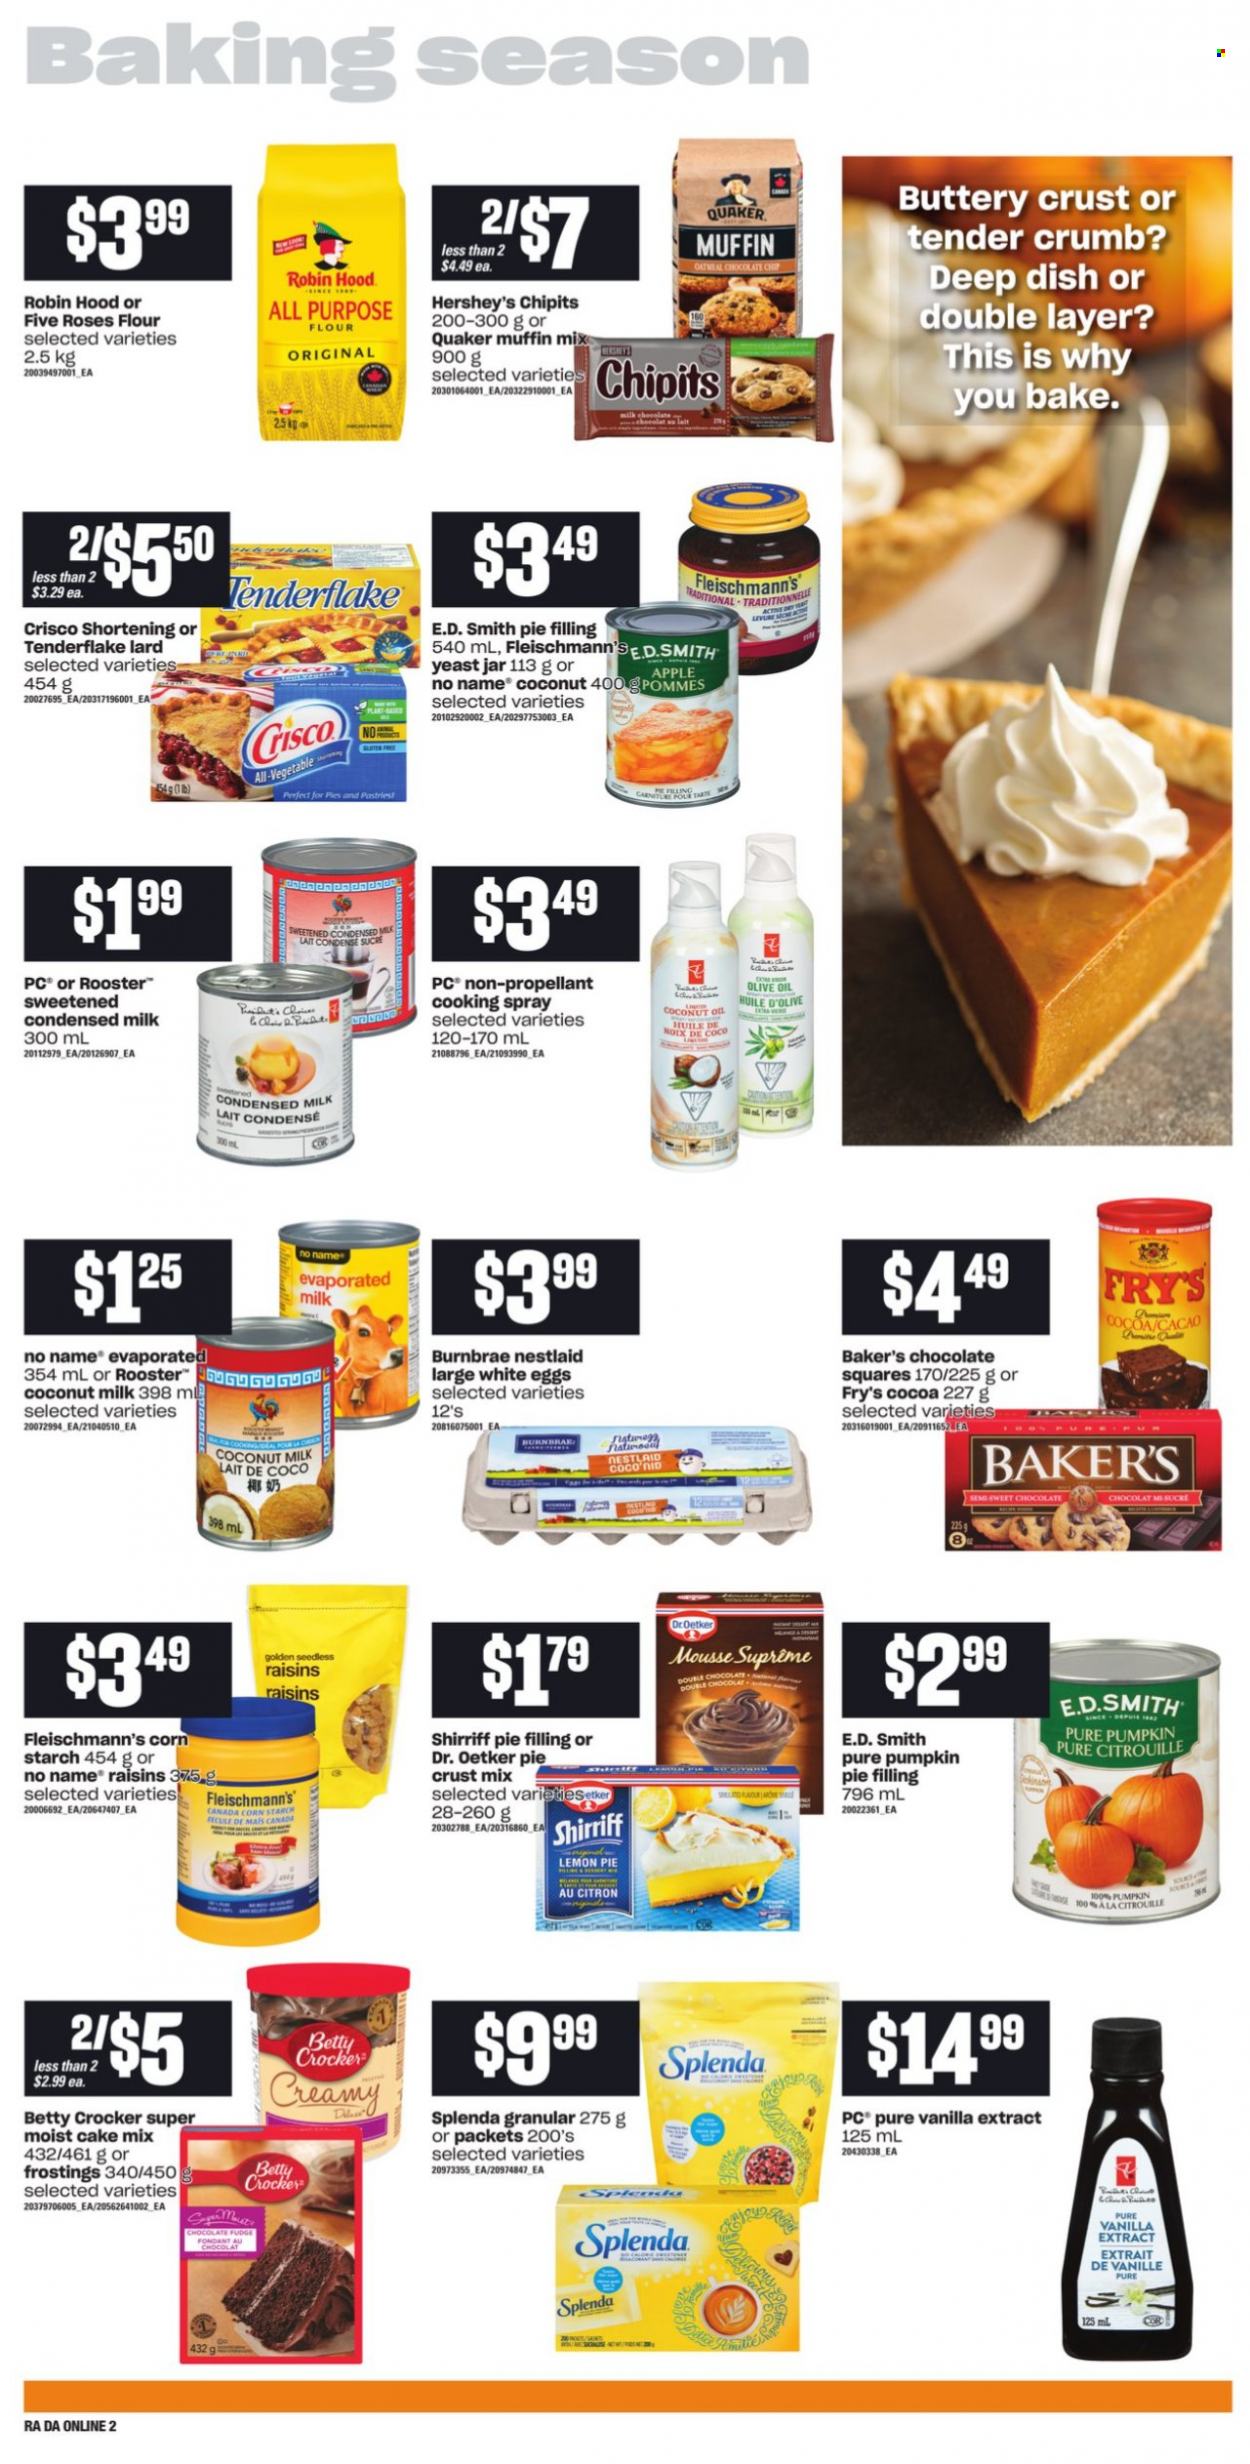 thumbnail - Atlantic Superstore Flyer - September 23, 2021 - September 29, 2021 - Sales products - cake mix, muffin mix, pumpkin, No Name, Quaker, Dr. Oetker, evaporated milk, condensed milk, eggs, yeast, Hershey's, chocolate chips, all purpose flour, cocoa, Crisco, flour, shortening, pie crust, pie filling, oatmeal, vanilla extract, coconut milk, cooking spray, olive oil, oil, dried fruit, lard, raisins. Page 6.